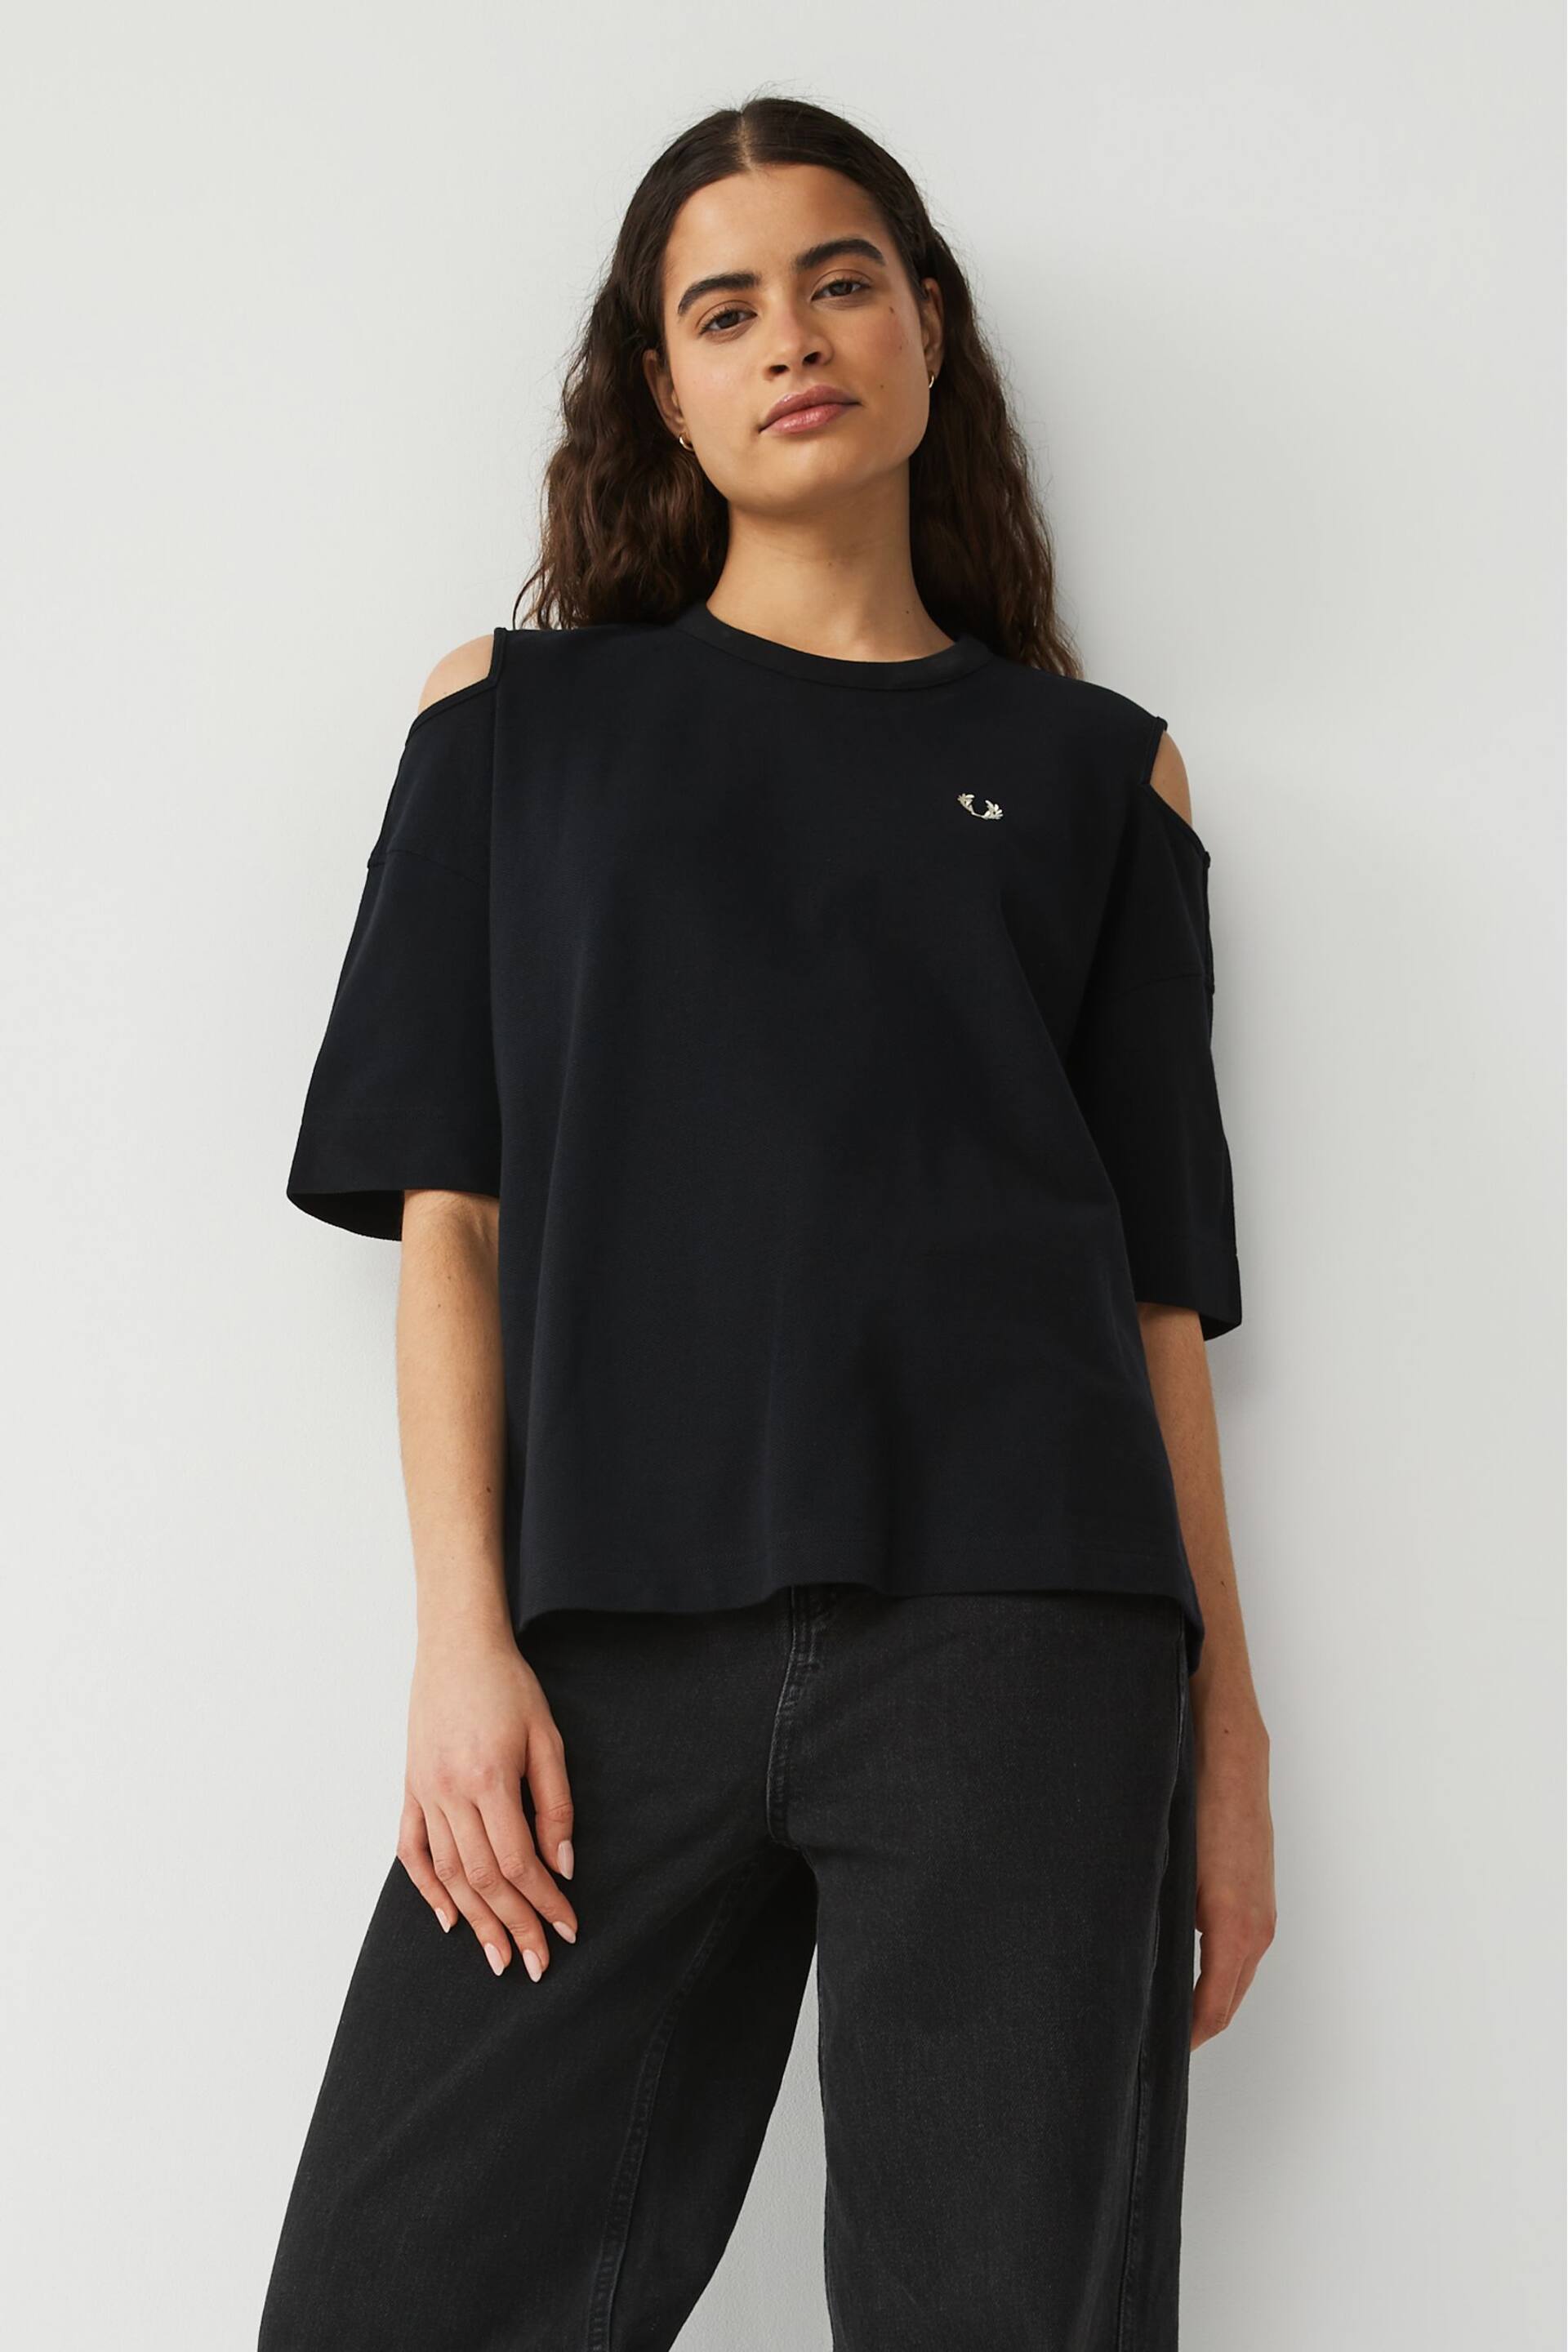 Fred Perry Womens Black Cut Out T-Shirt - Image 1 of 4